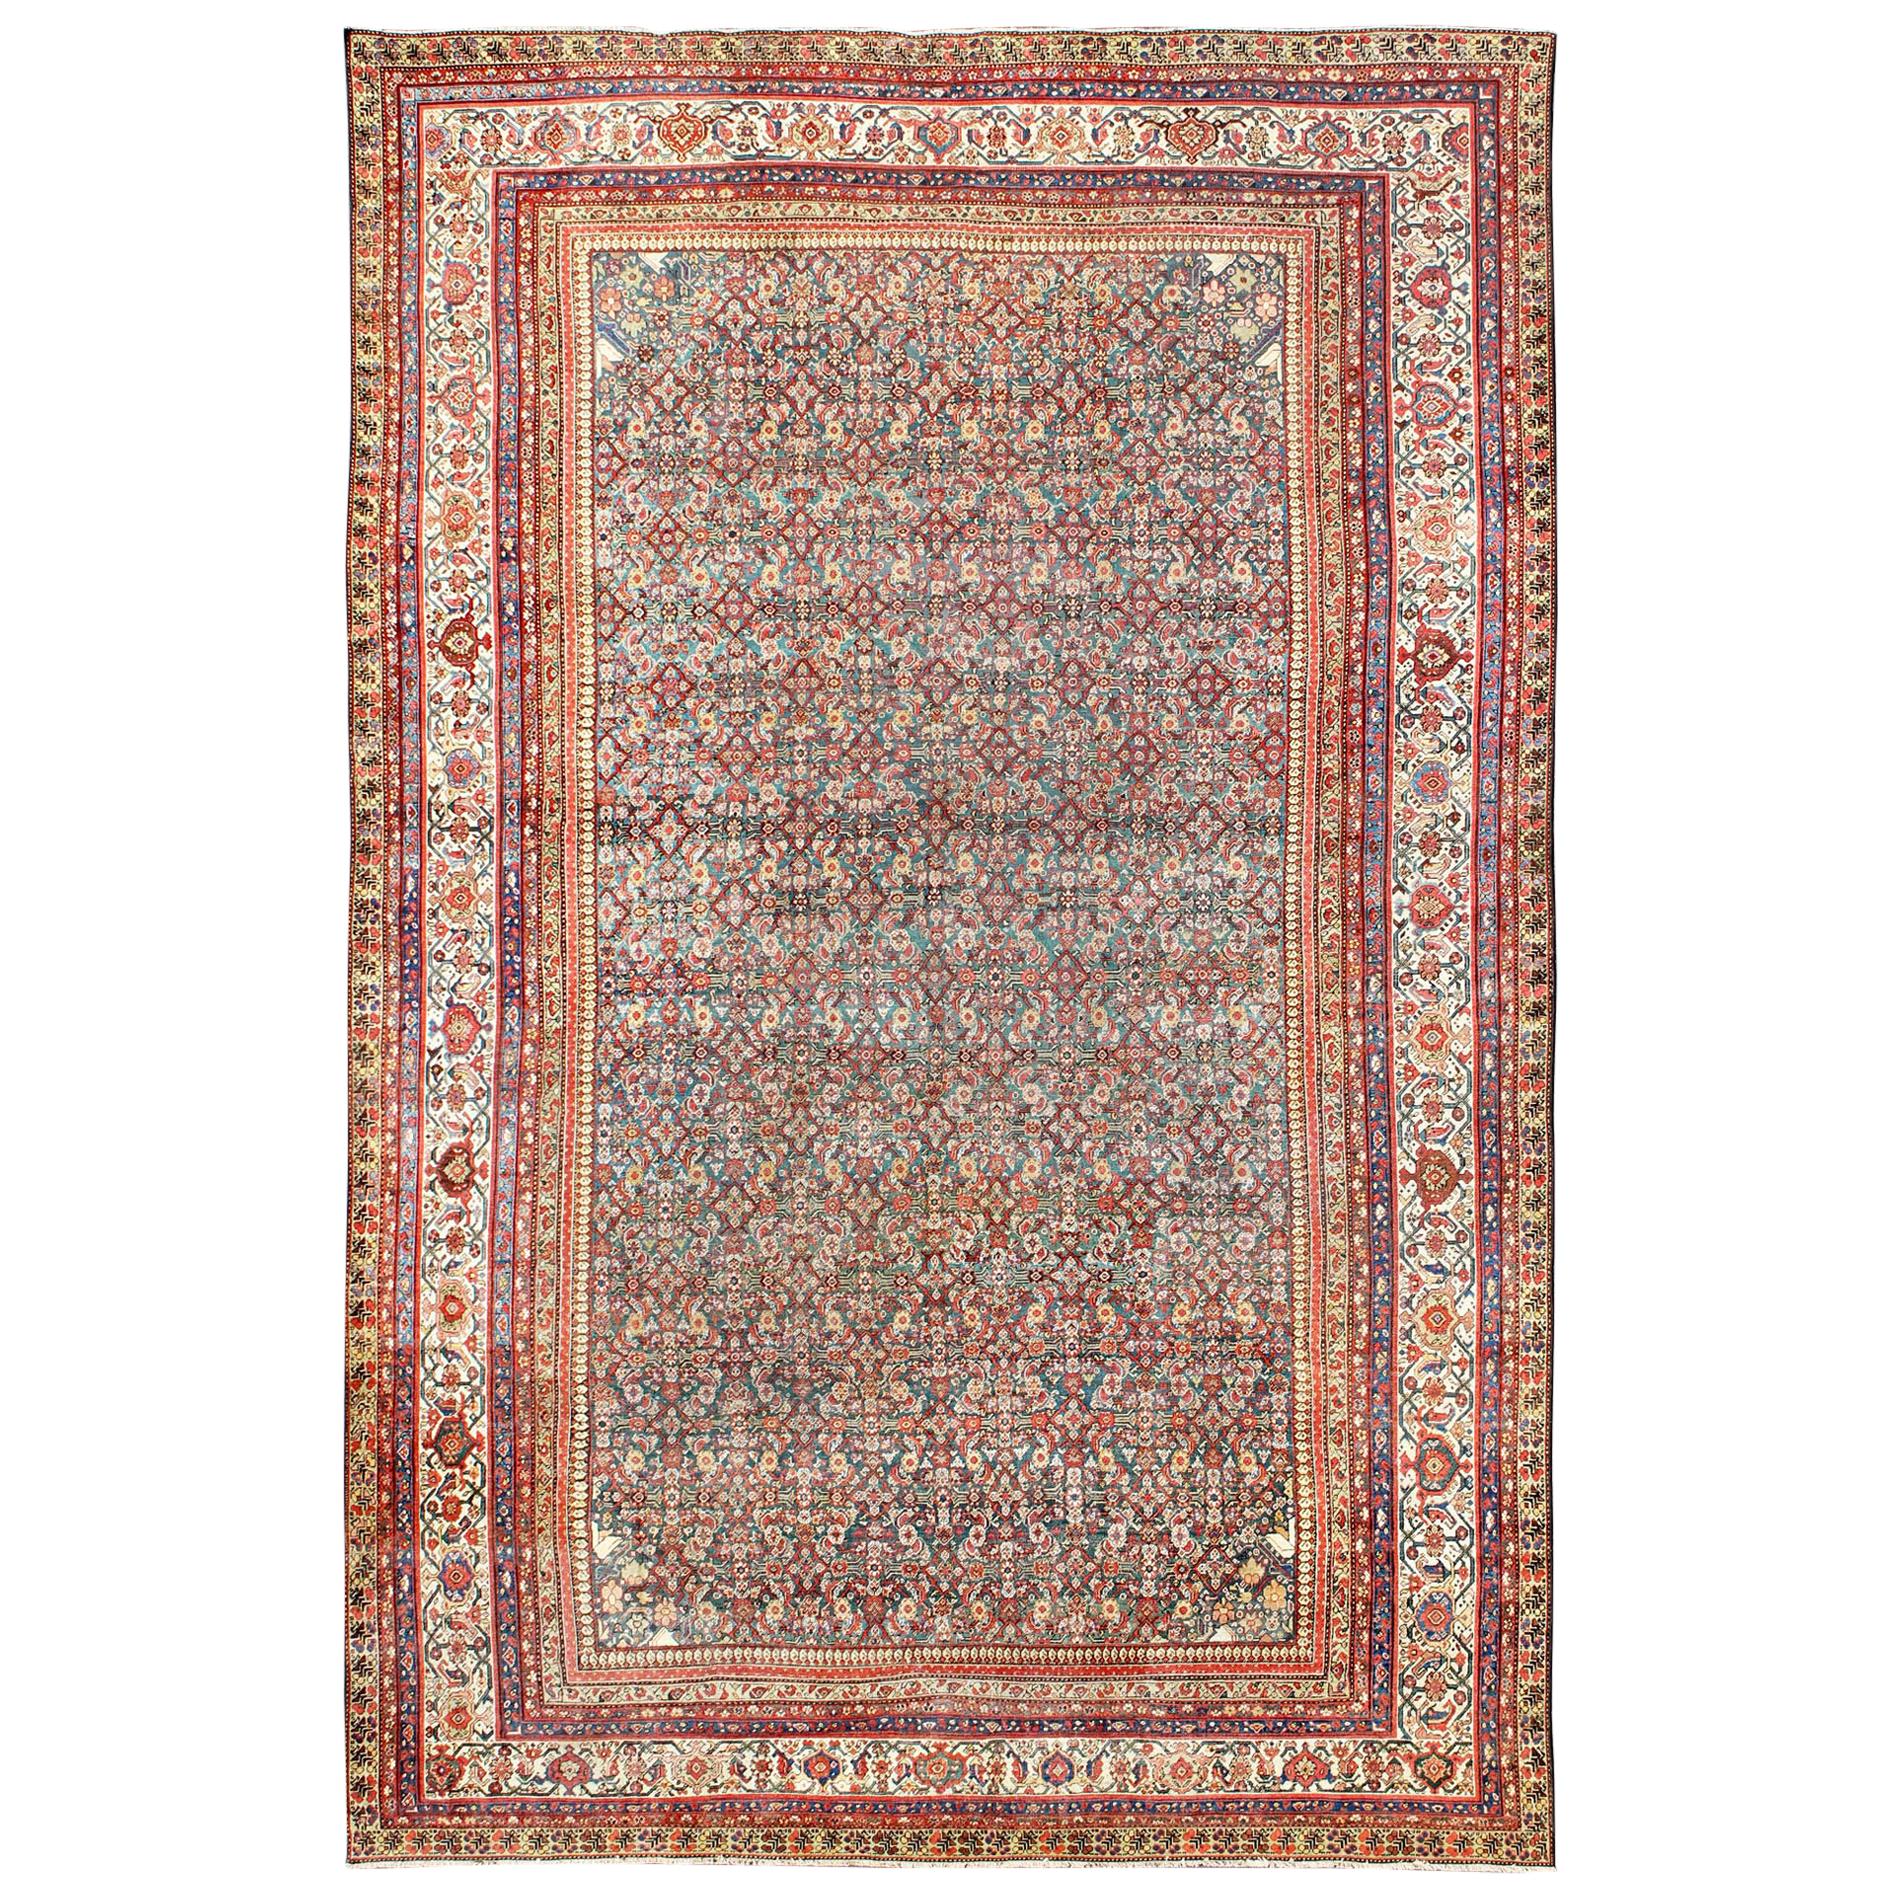 Large All-Over Antique Persian Sultanabad Rug in Green Background